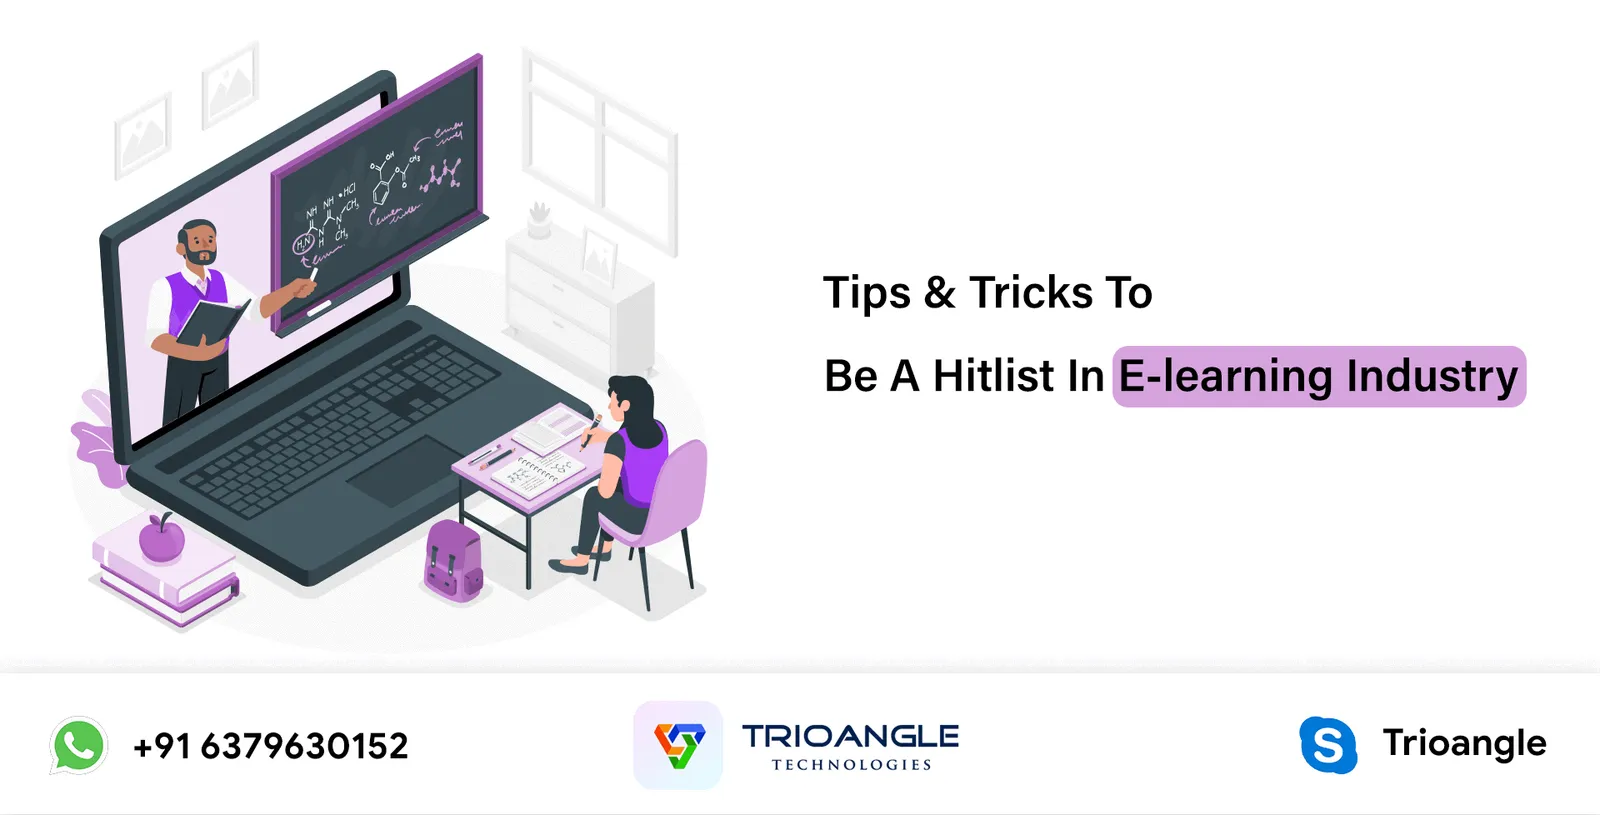 Tips & tricks to Be a Hitlist in E-learning Industry